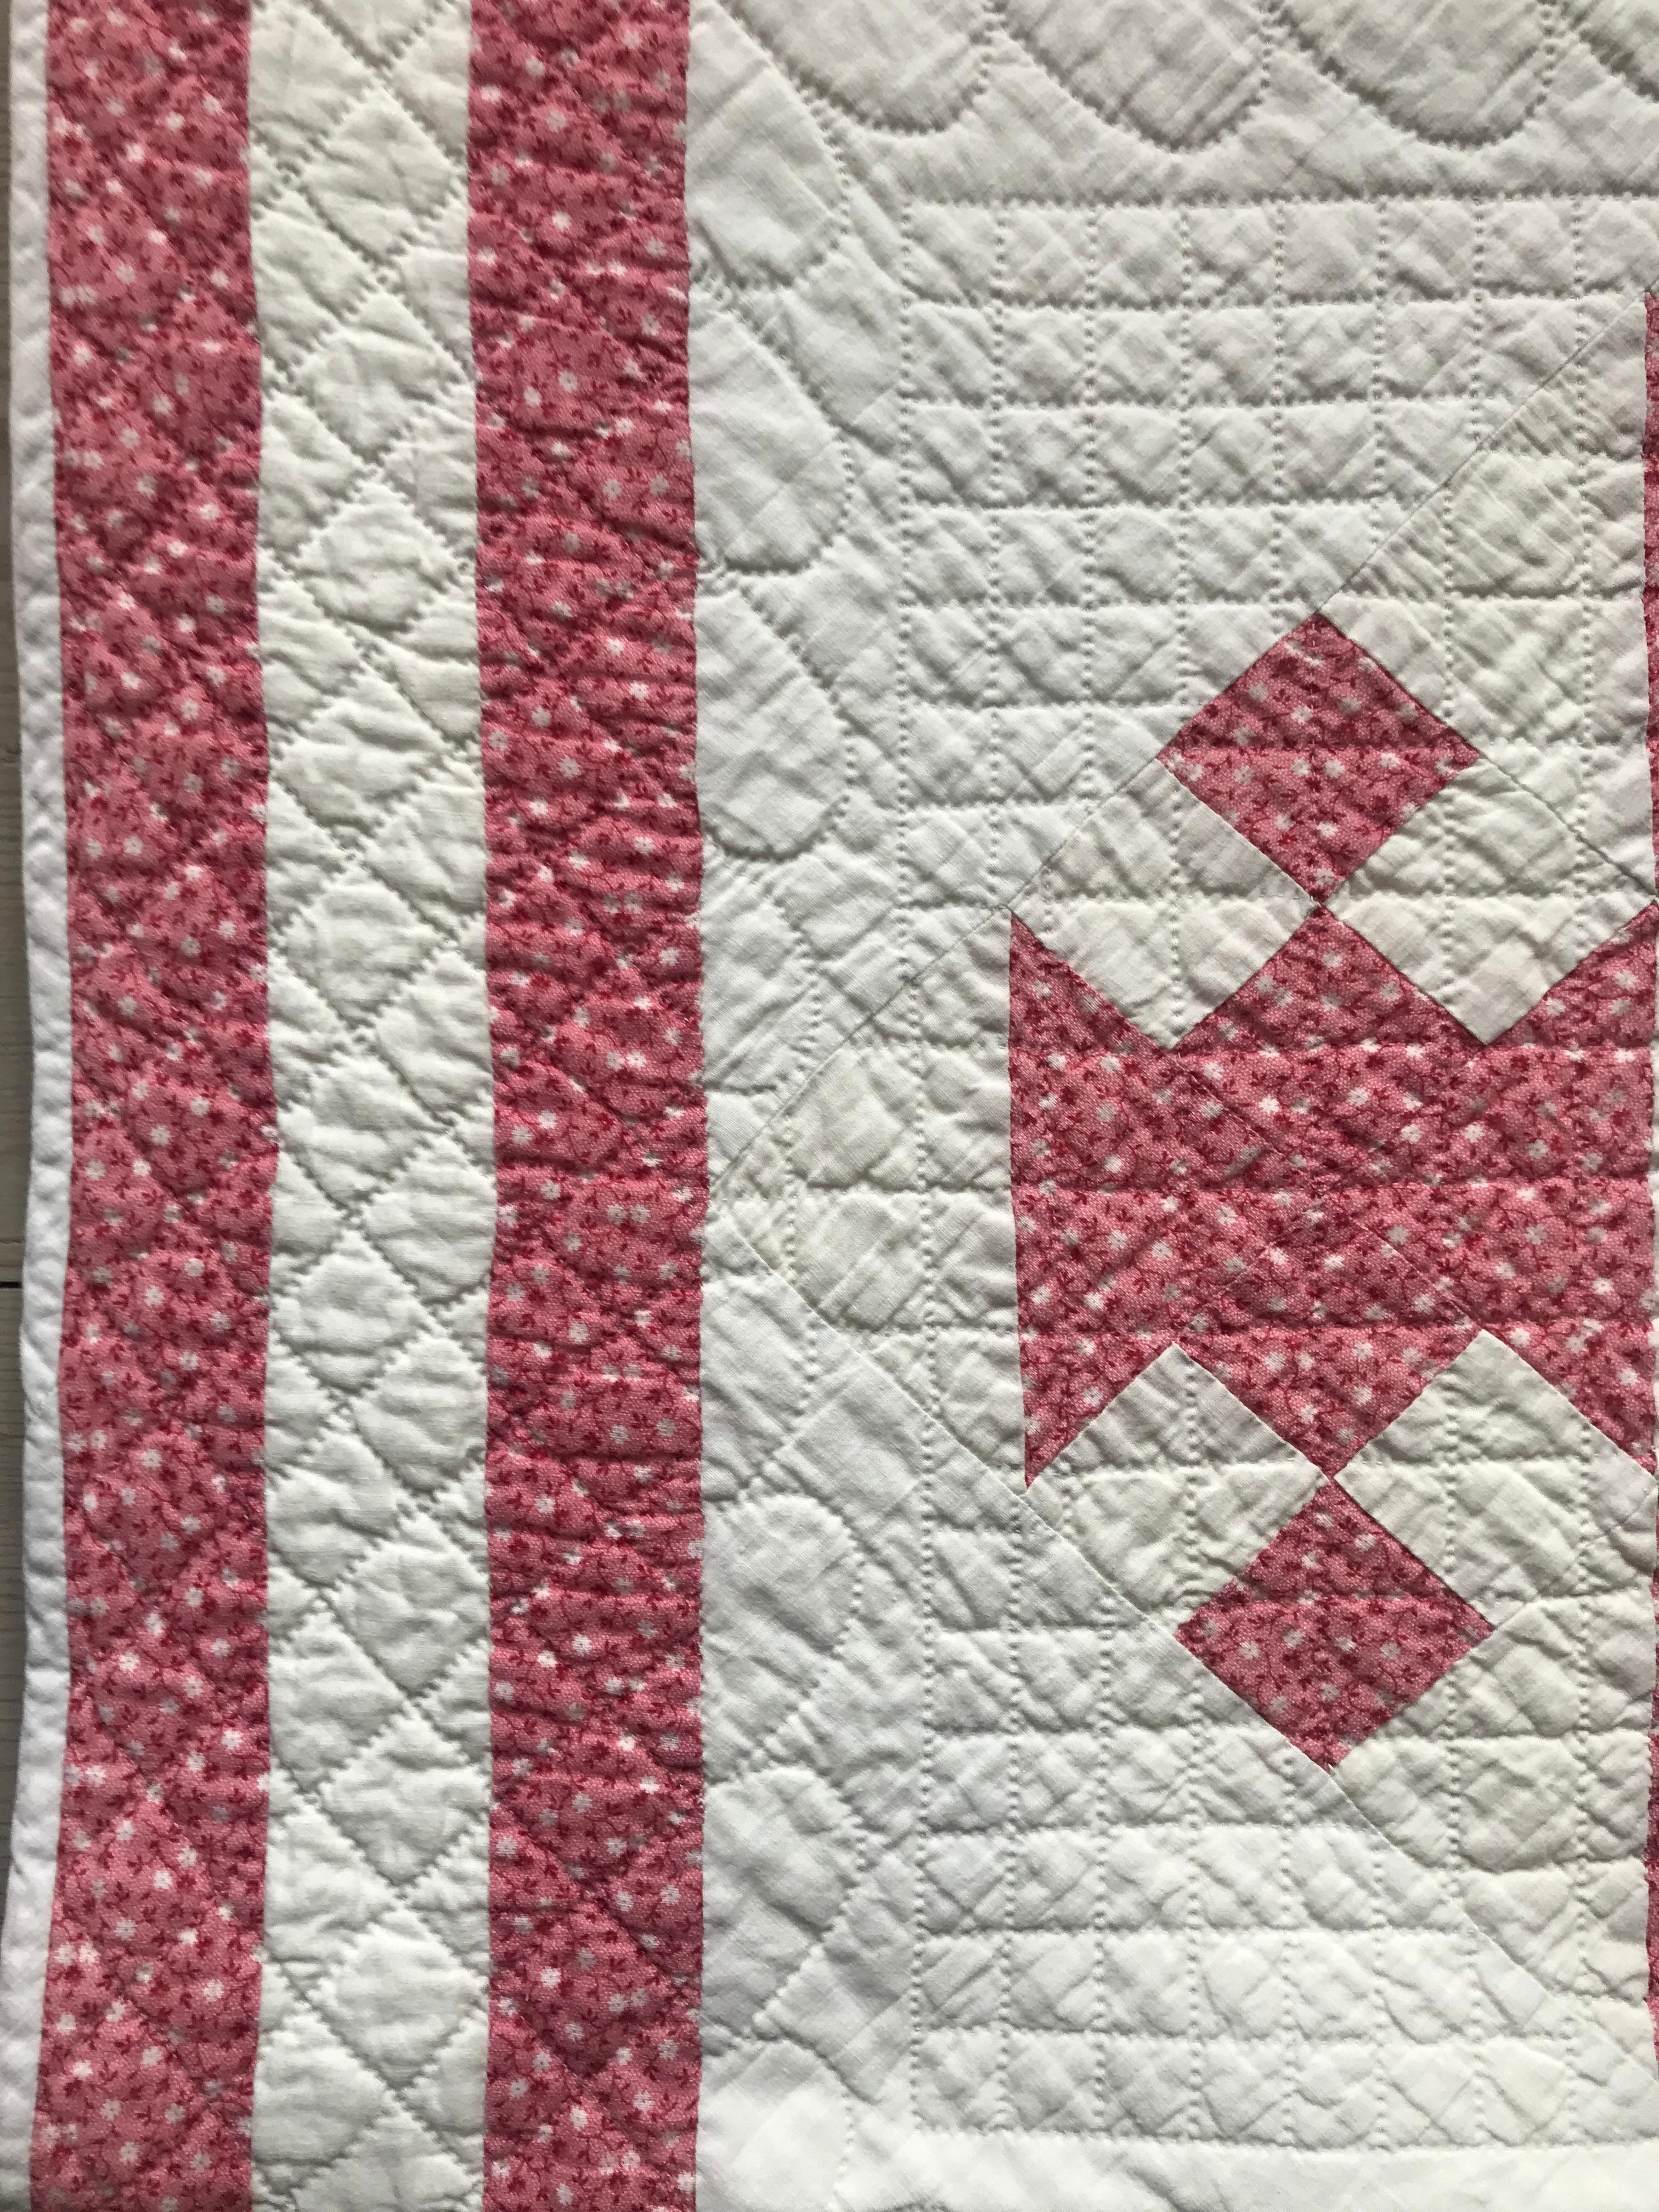 Lovely antique pink and white Jacob's ladder quilt.